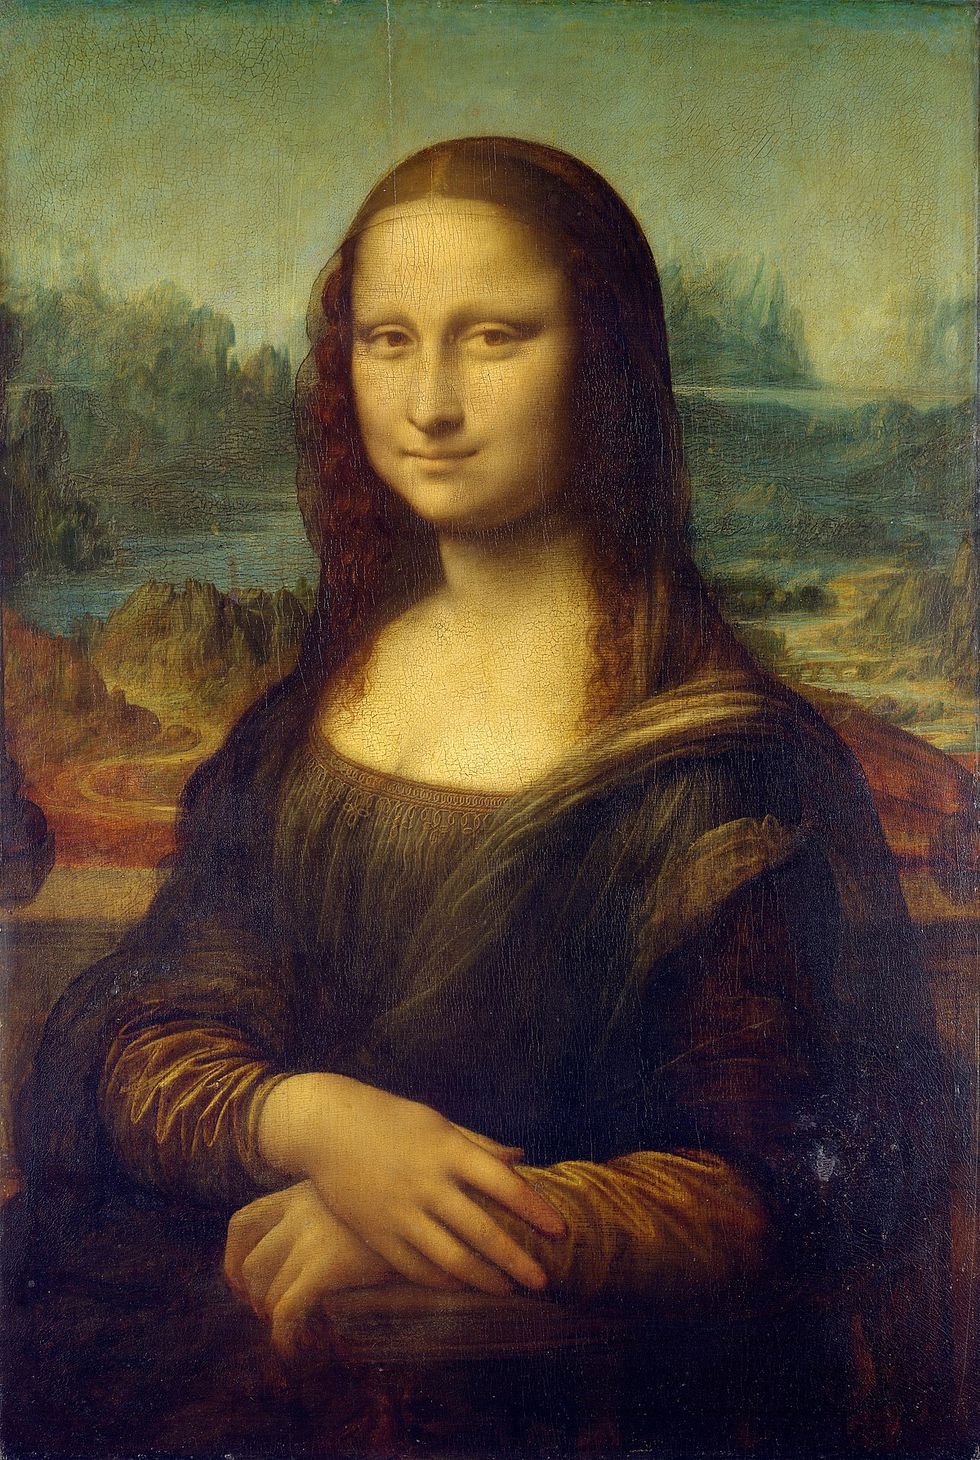 What If Hitler Painted The Mona Lisa?